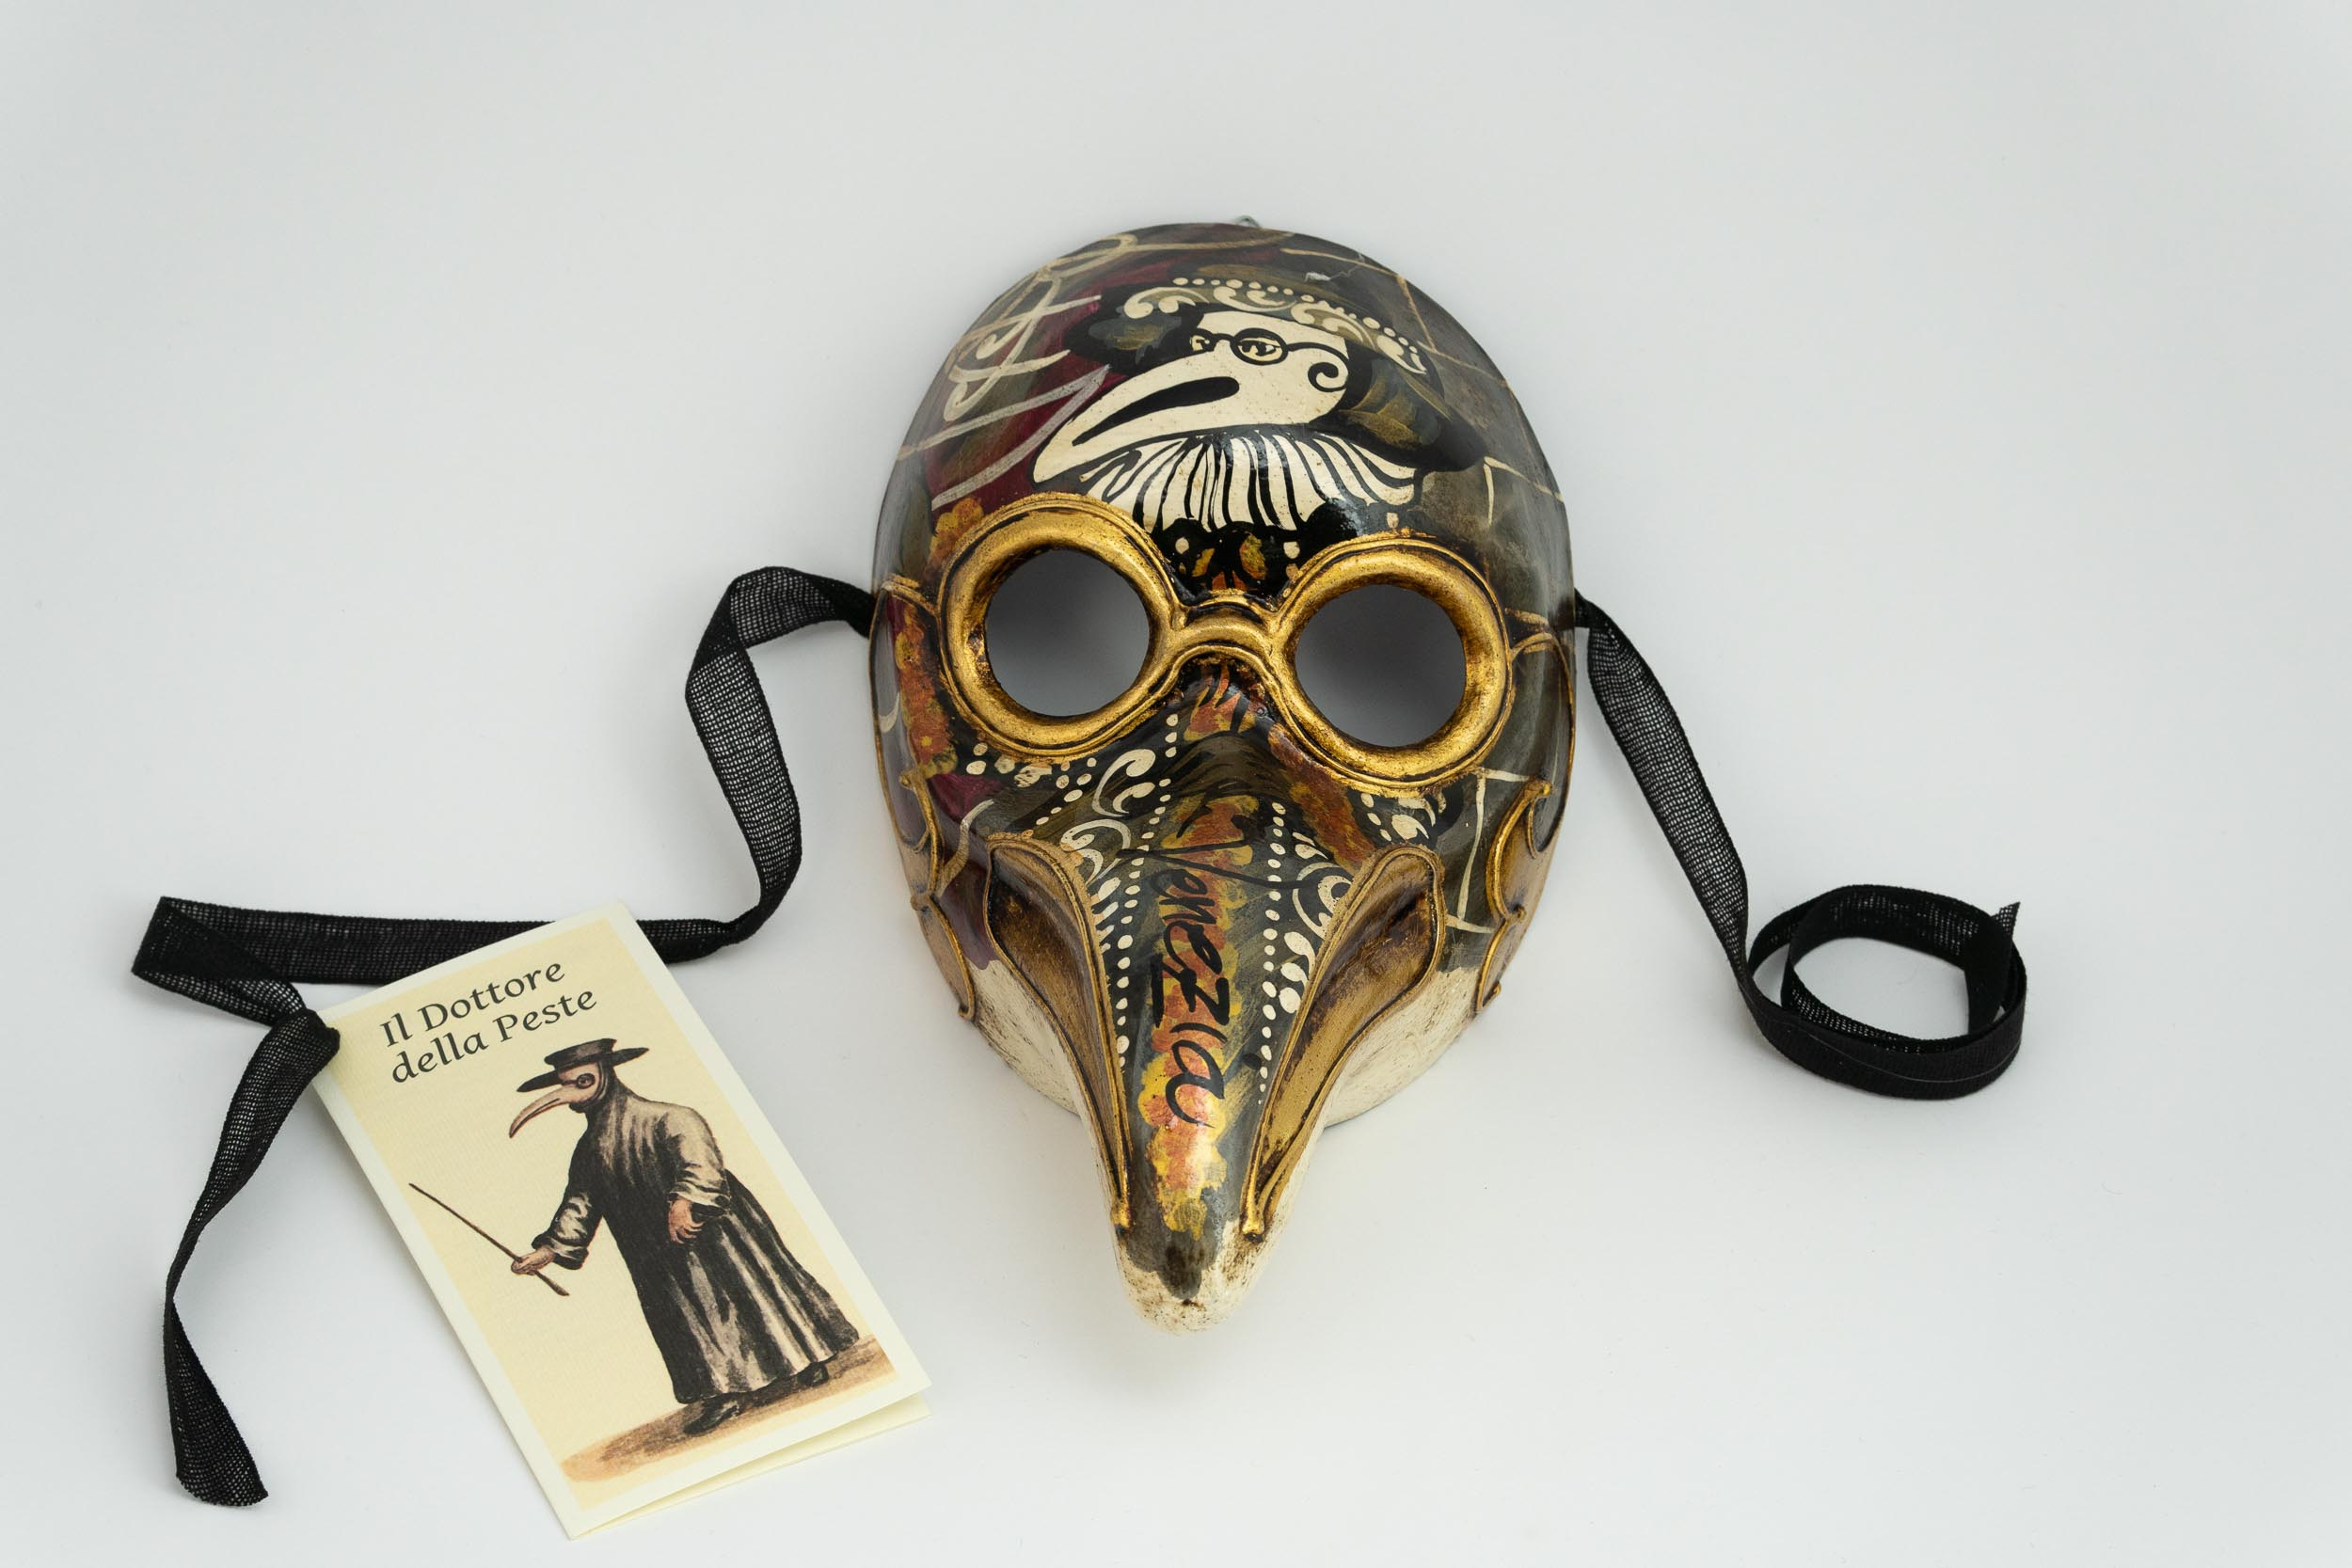 Learn how to decorate your own masquerade mask in a Ca' Macana course for  families and groups